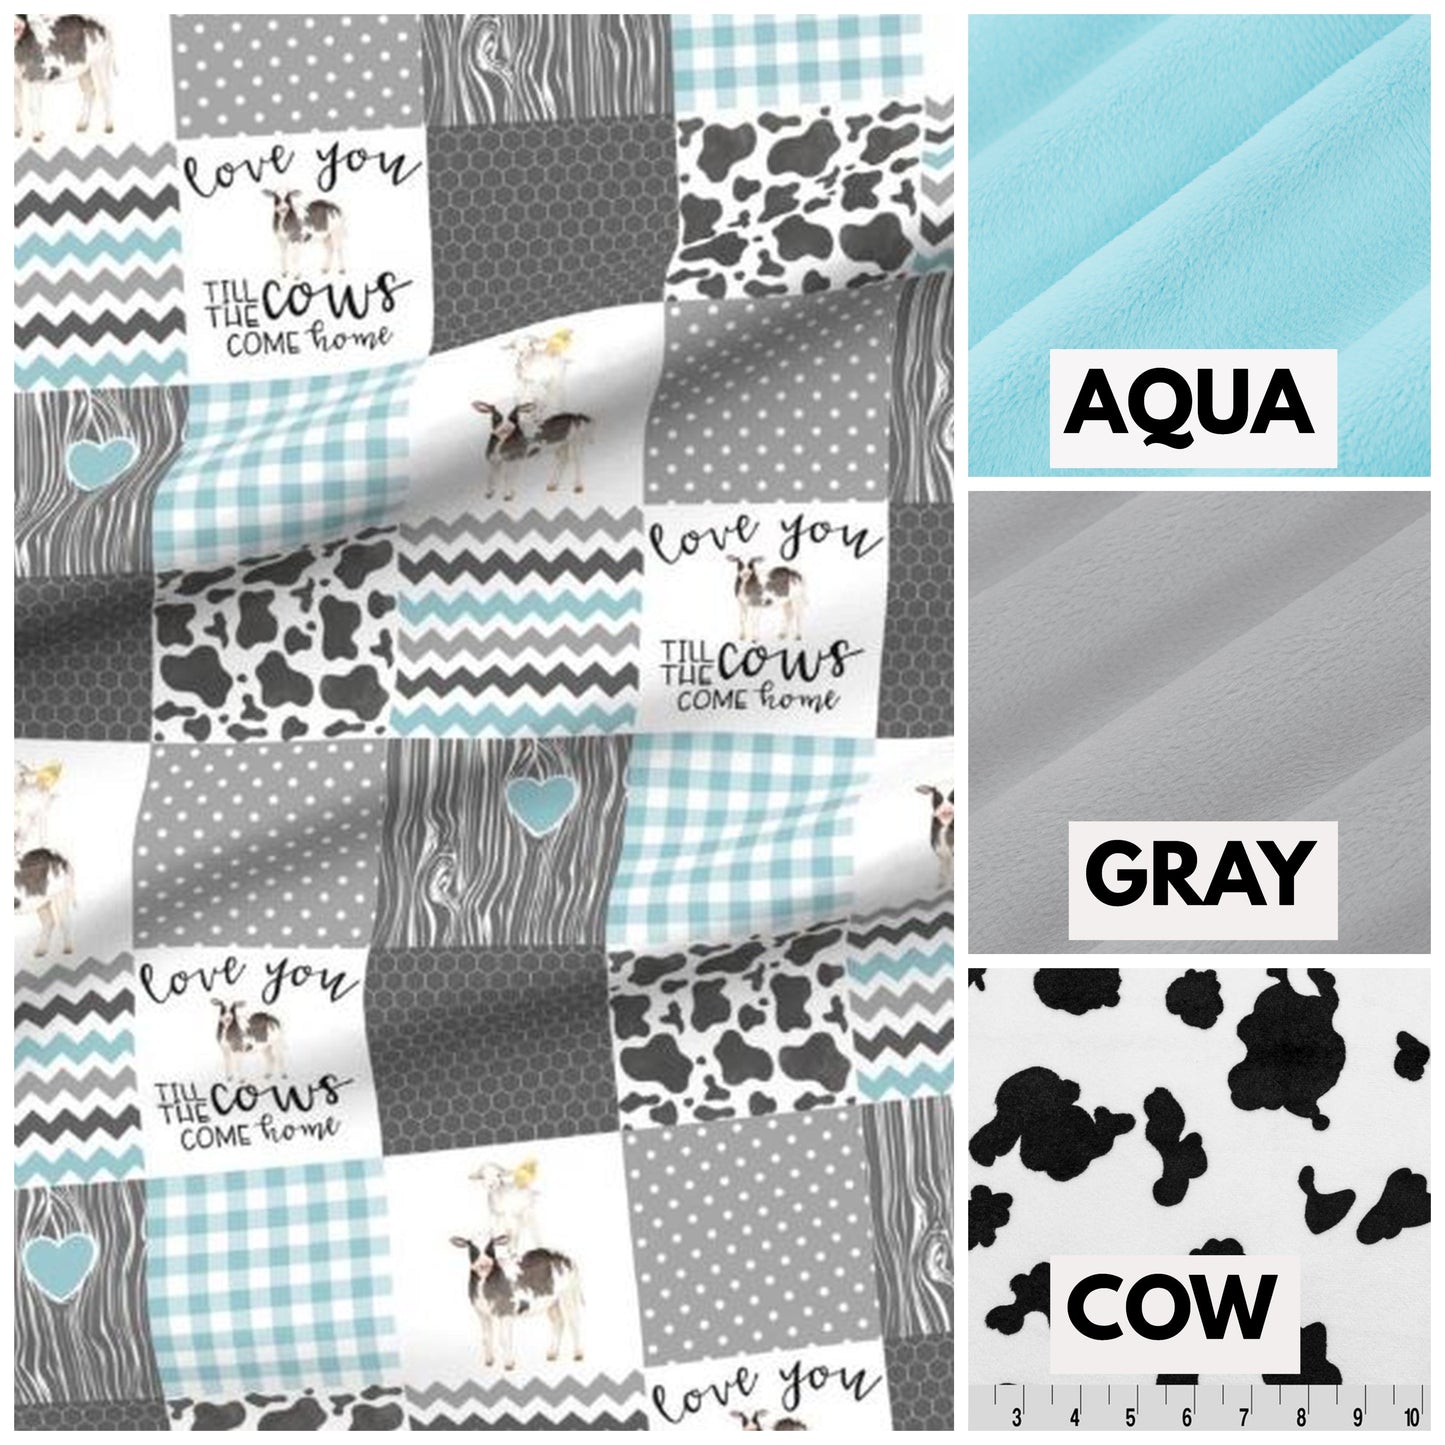 minky colors available for the back of the blanket - aqua, gray & cow print